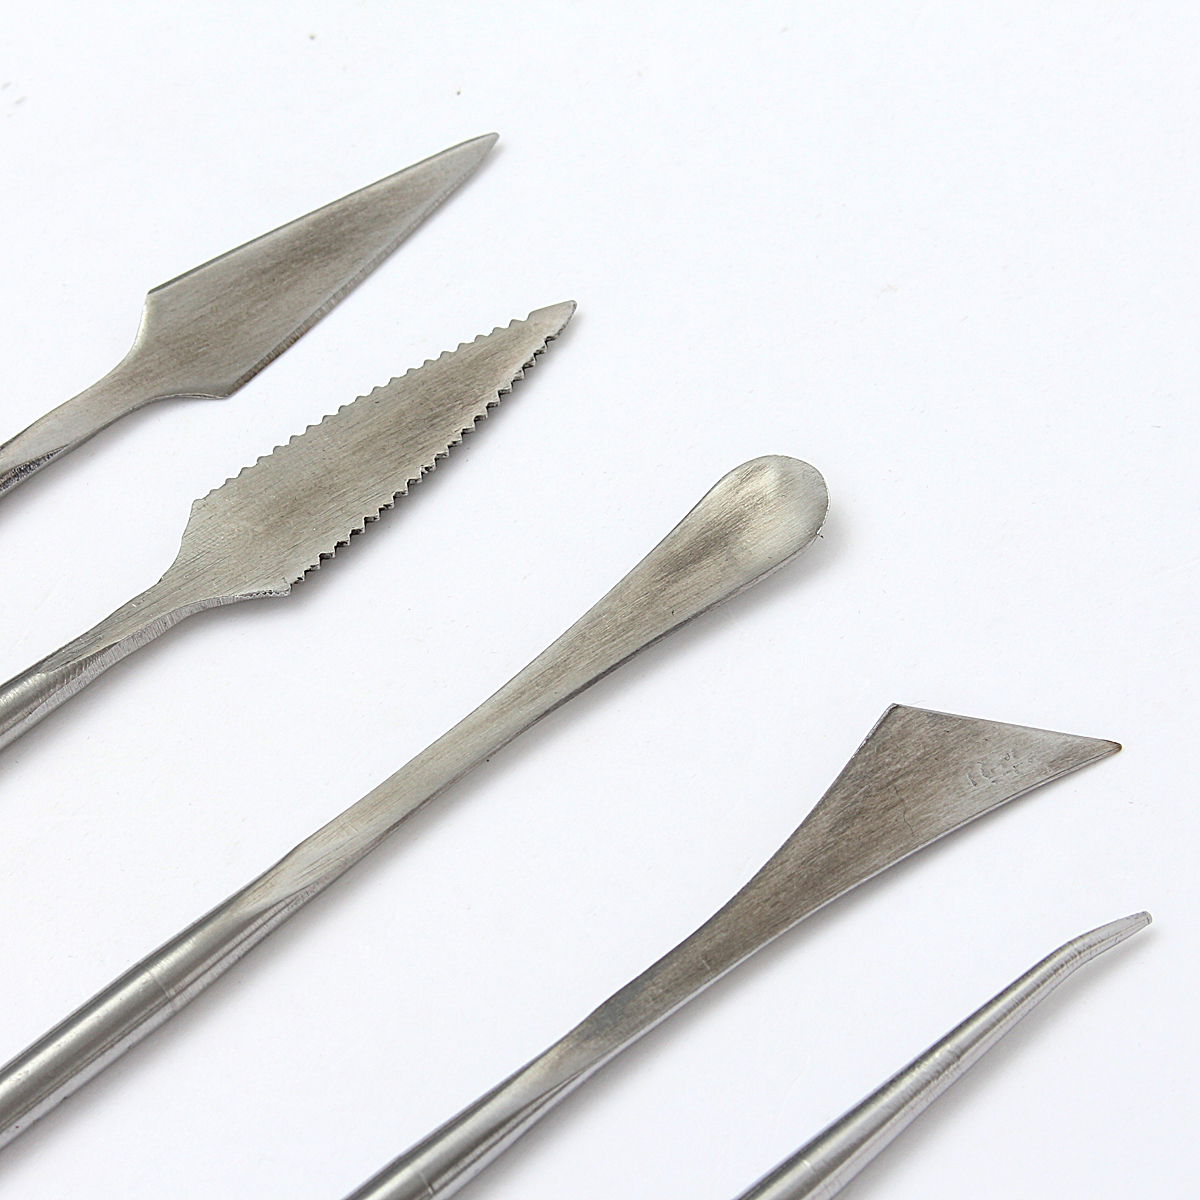 5Pcsset-Clay-Scrapers-Stainless-Steel-Clay-Sculpting-Tools-Carving-Pottery-Tools-Artist-Supplies-1771272-4